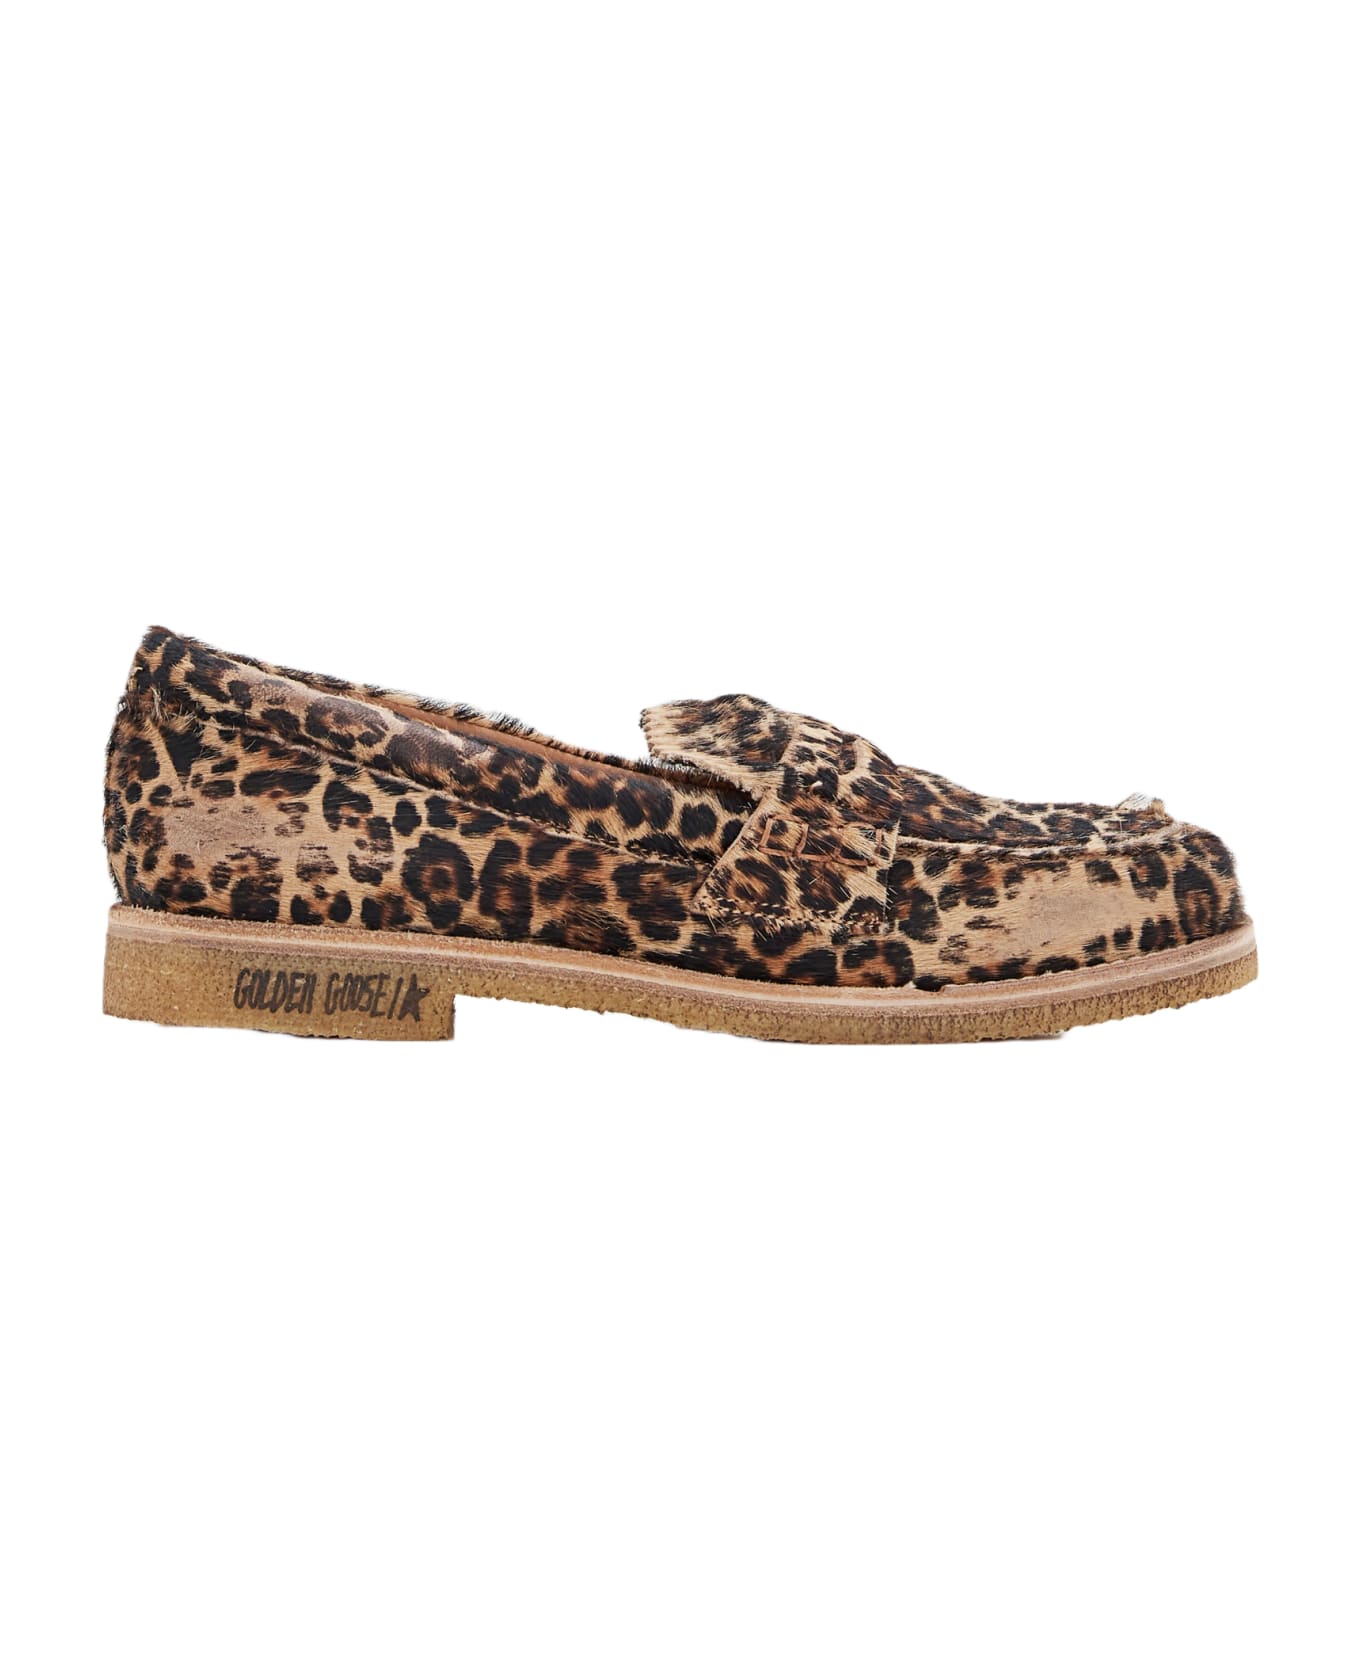 Golden Goose Jerry Leopard Print Horsy Leather Loafers - Brown